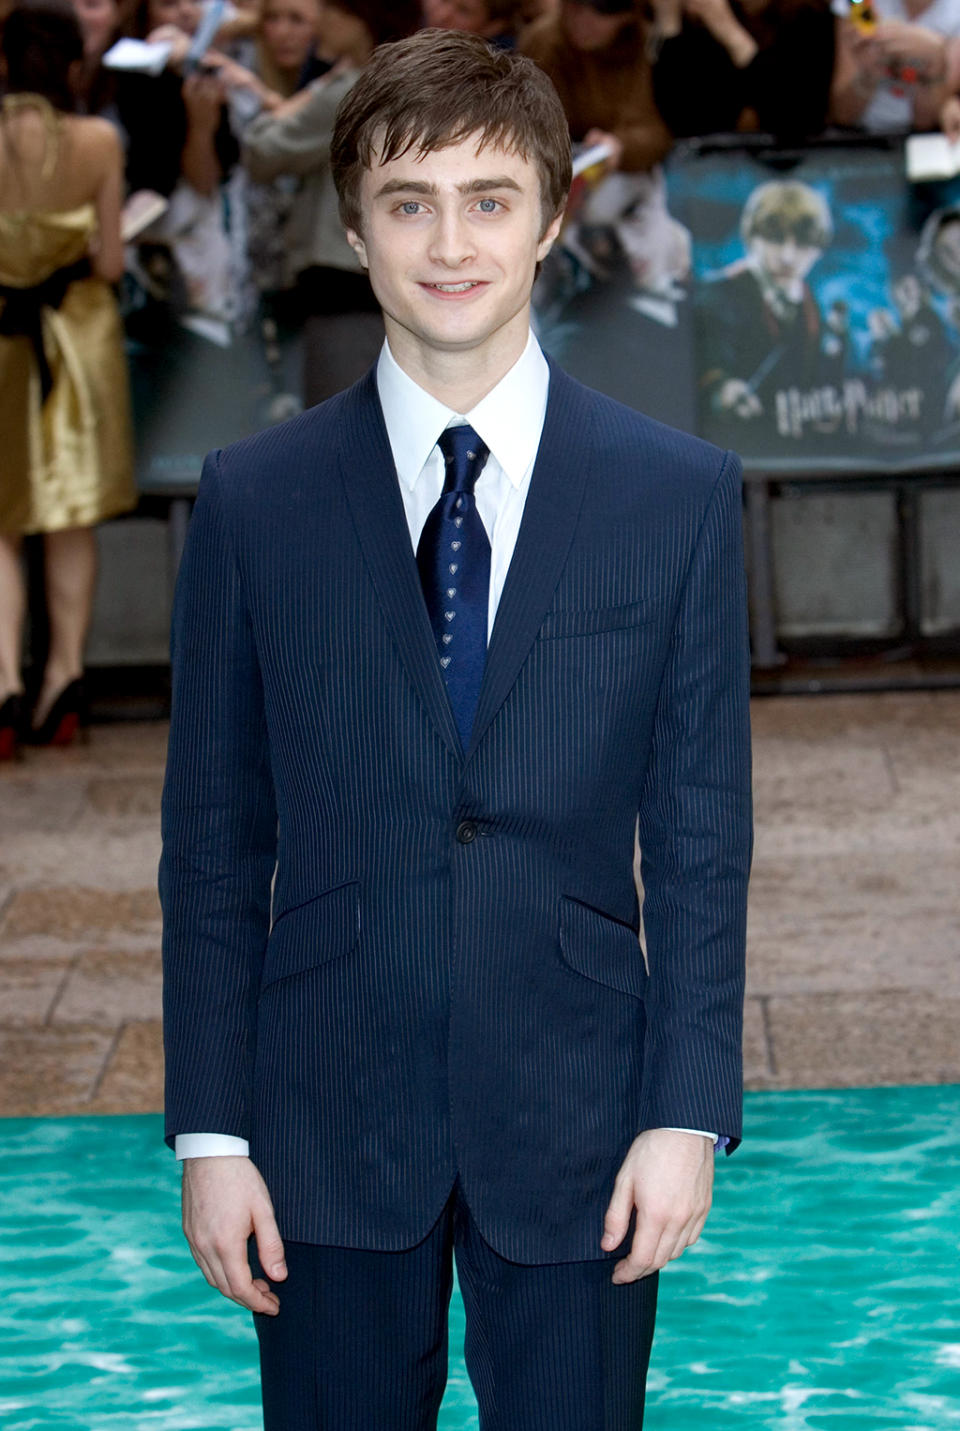 ‘Harry Potter And The Order Of The Phoenix’ London Premiere (2007)